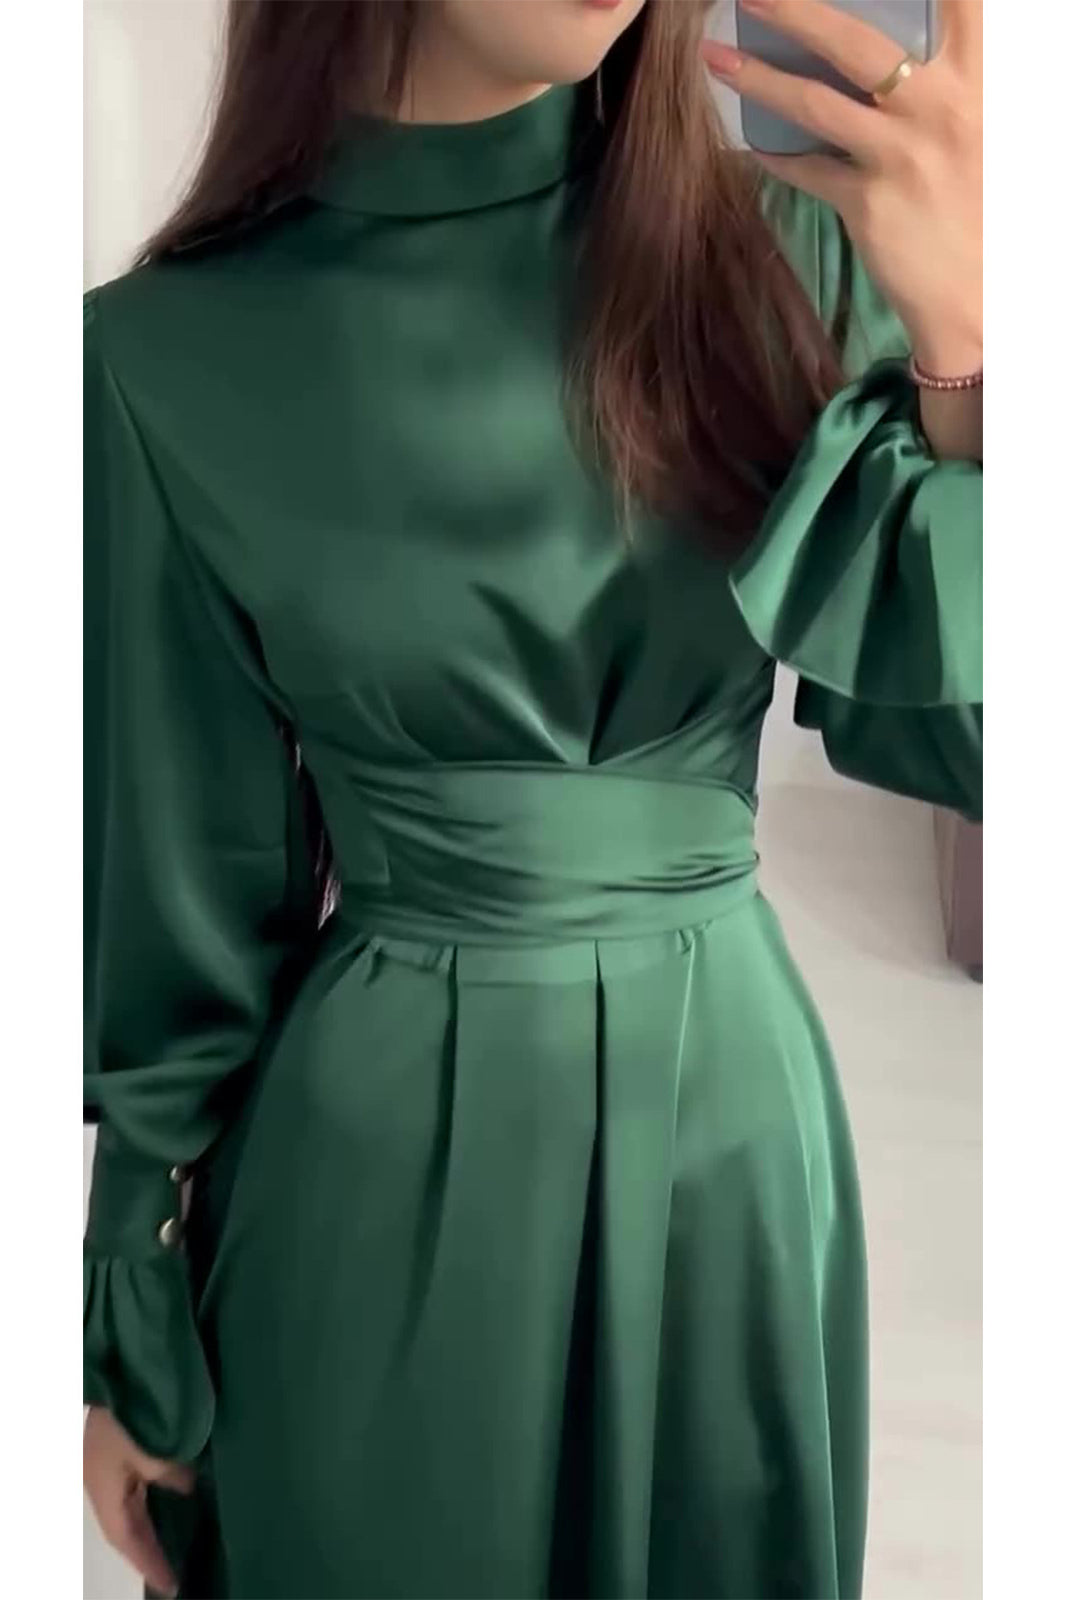 Green dress with long sleeves and puff sleeves